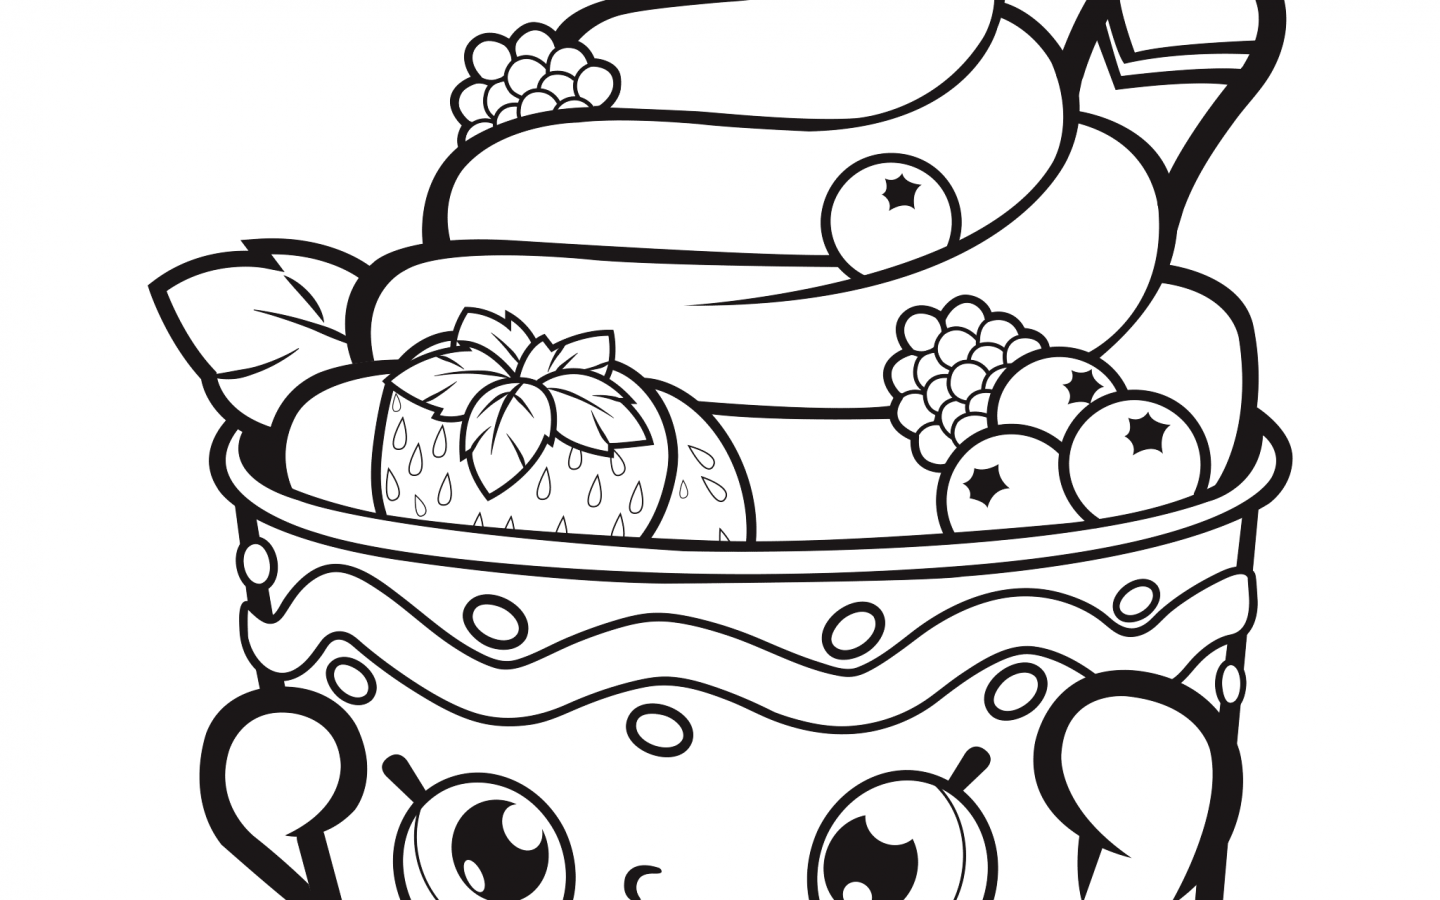 Cream Coloring Pages at GetColorings.com | Free printable colorings